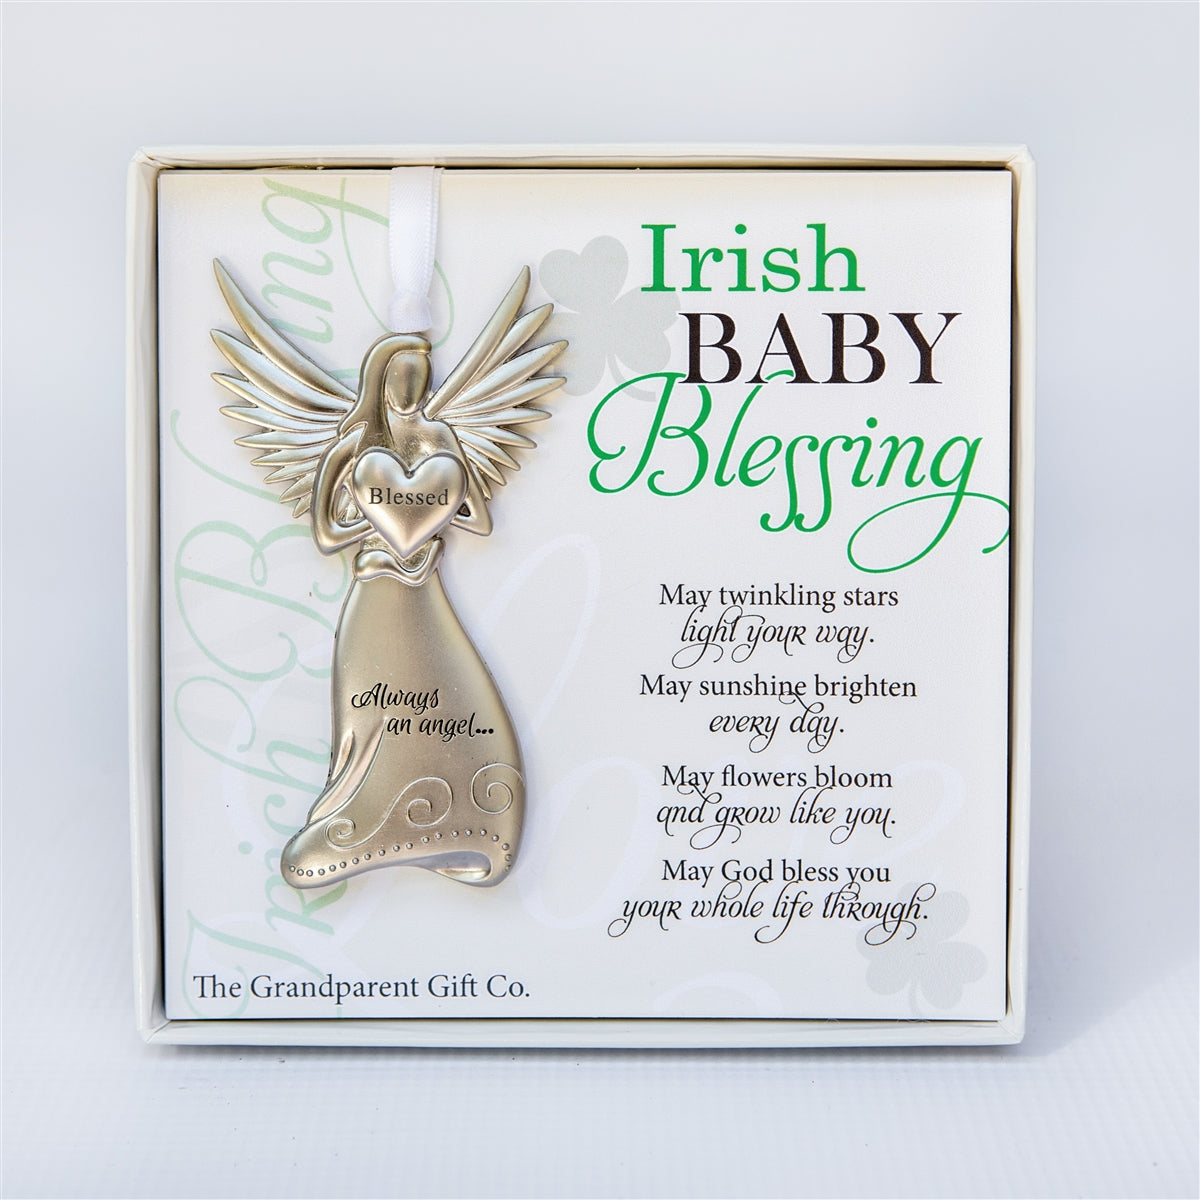 Irish Blessing Baby Gift - 4" metal blessed angel ornament with "Irish Baby Blessing" poem in white box with clear lid.